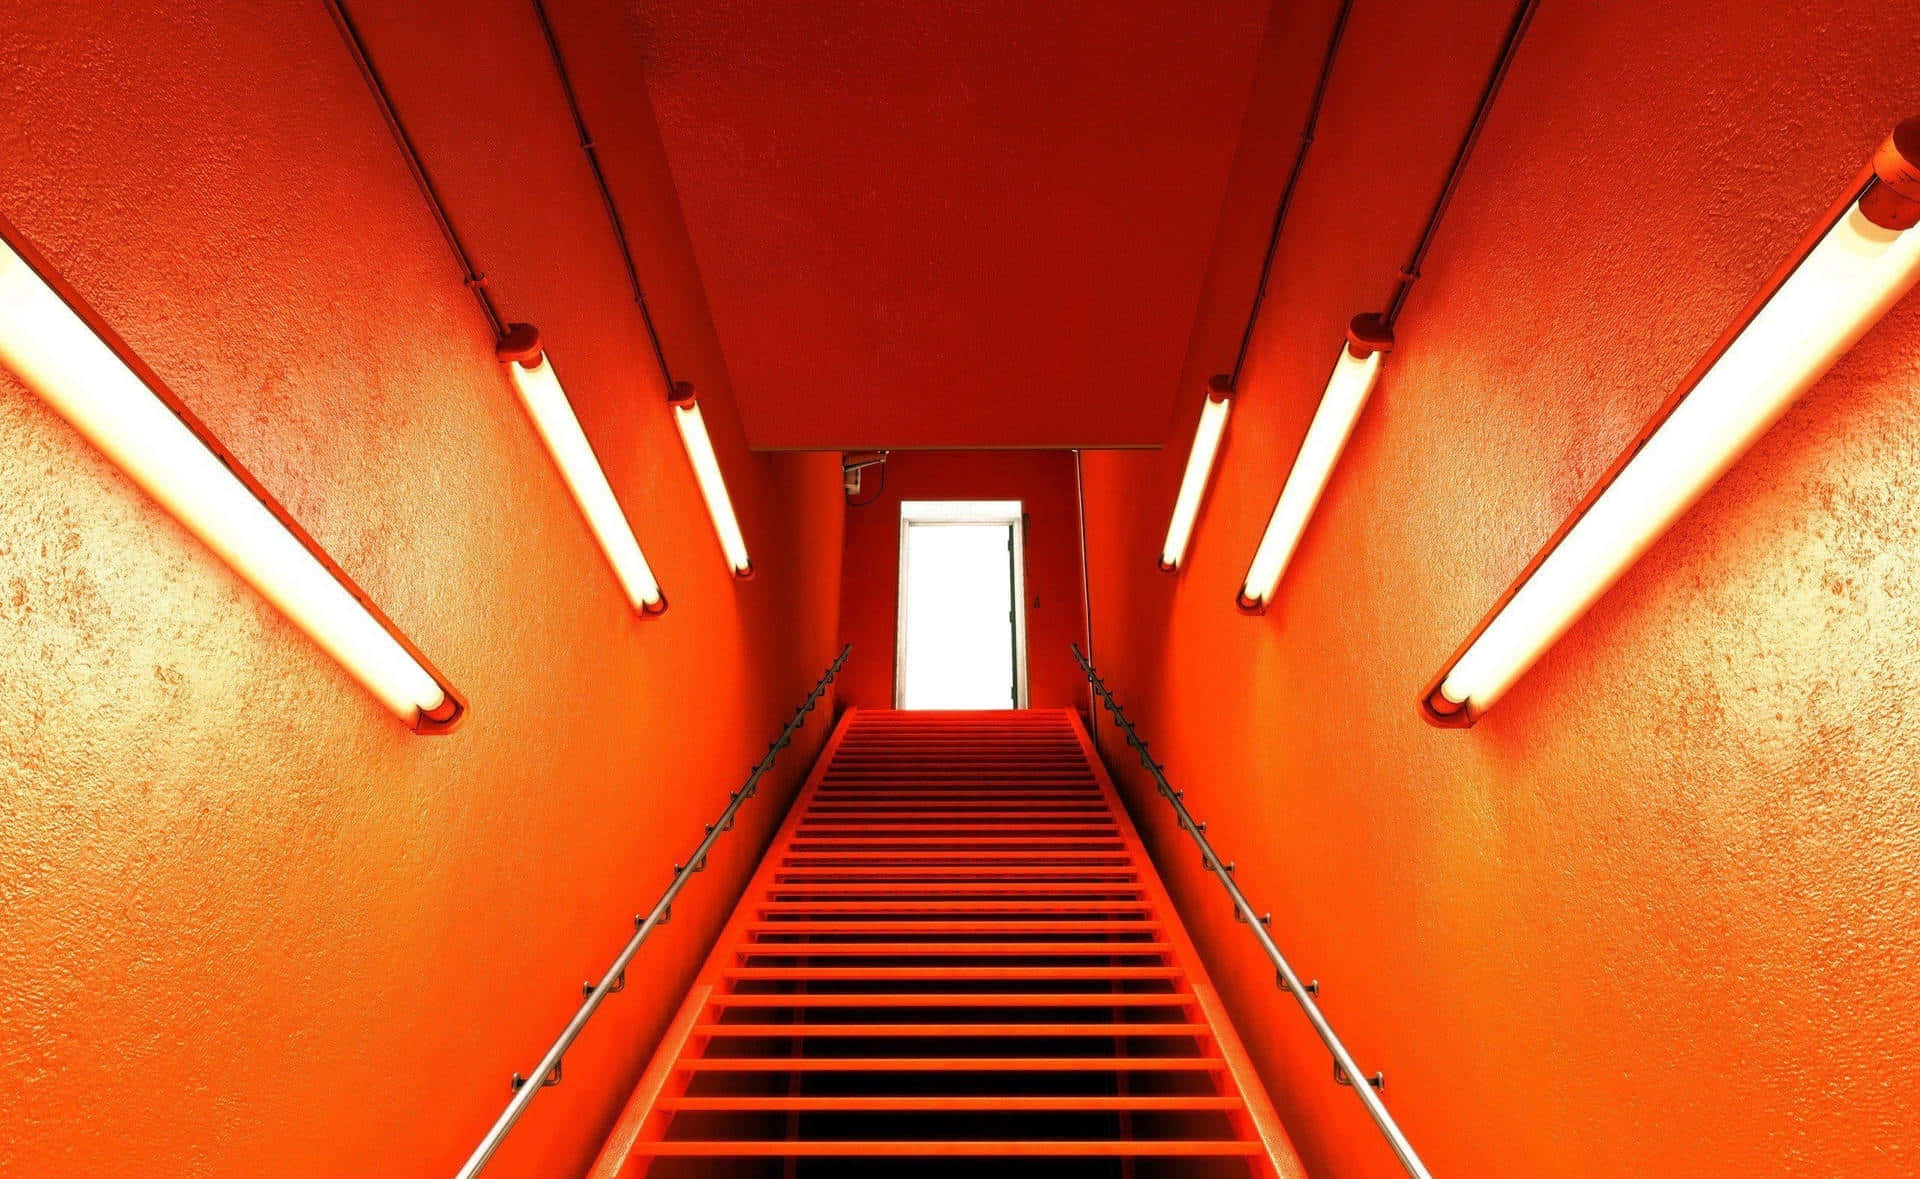 Vibrant Orange Staircasewith Lights Wallpaper